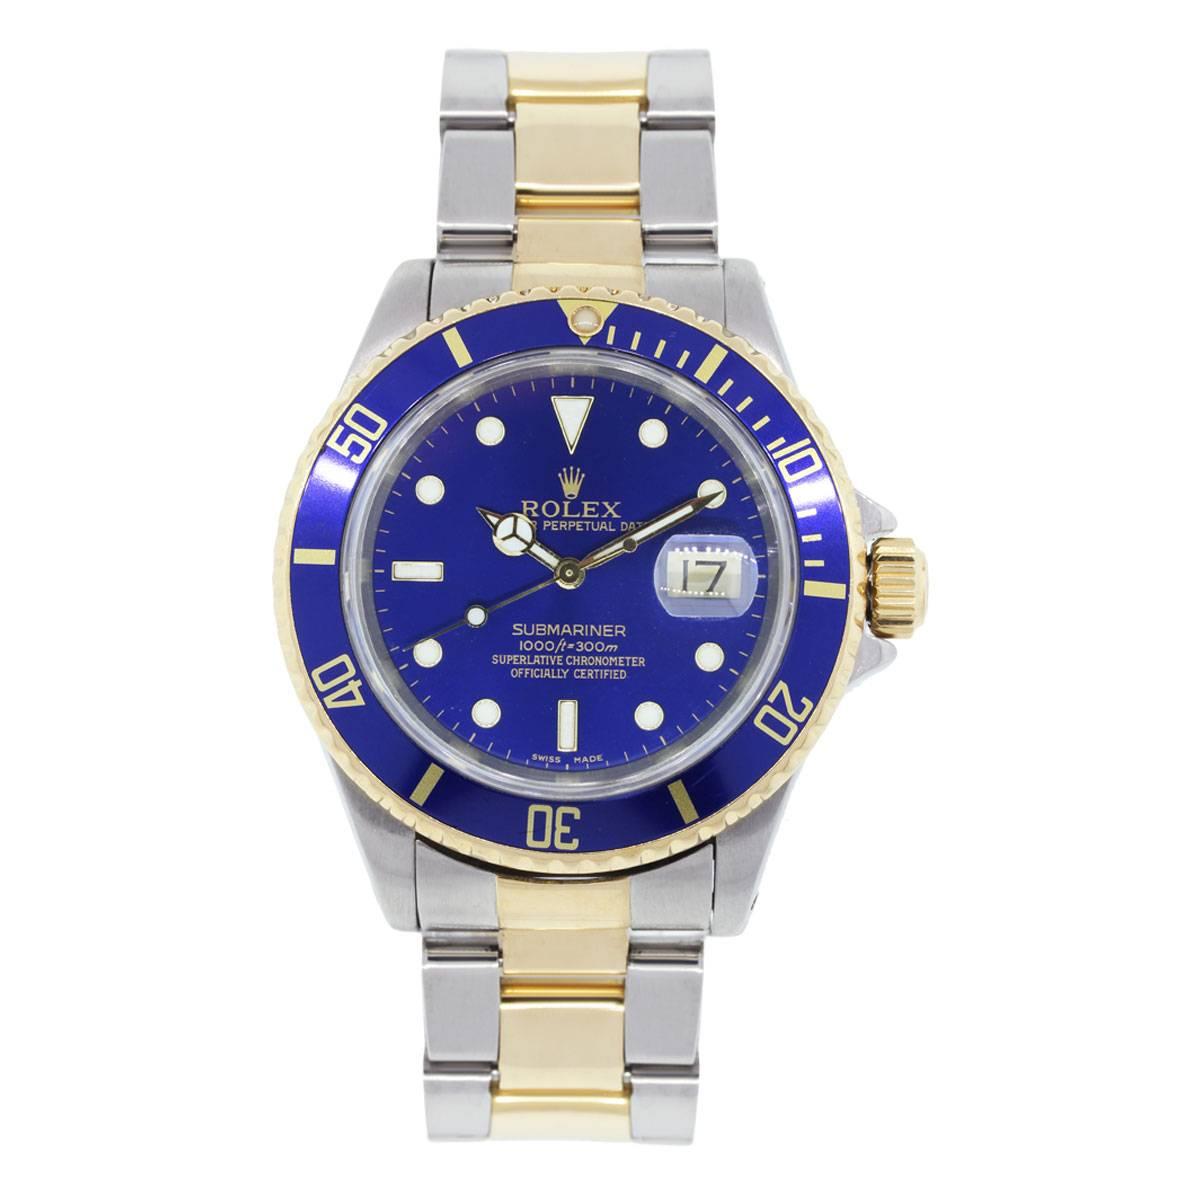 Brand: Rolex
Style: Submariner
MPN: 16613
Serial: S serial
Case Material: Stainless steel
Case Diameter: 40mm
Bezel: Unidirectional blue bezel
Dial: Blue index marker dial with luminescent markers and date window at the 3 o'clock position
Bracelet: